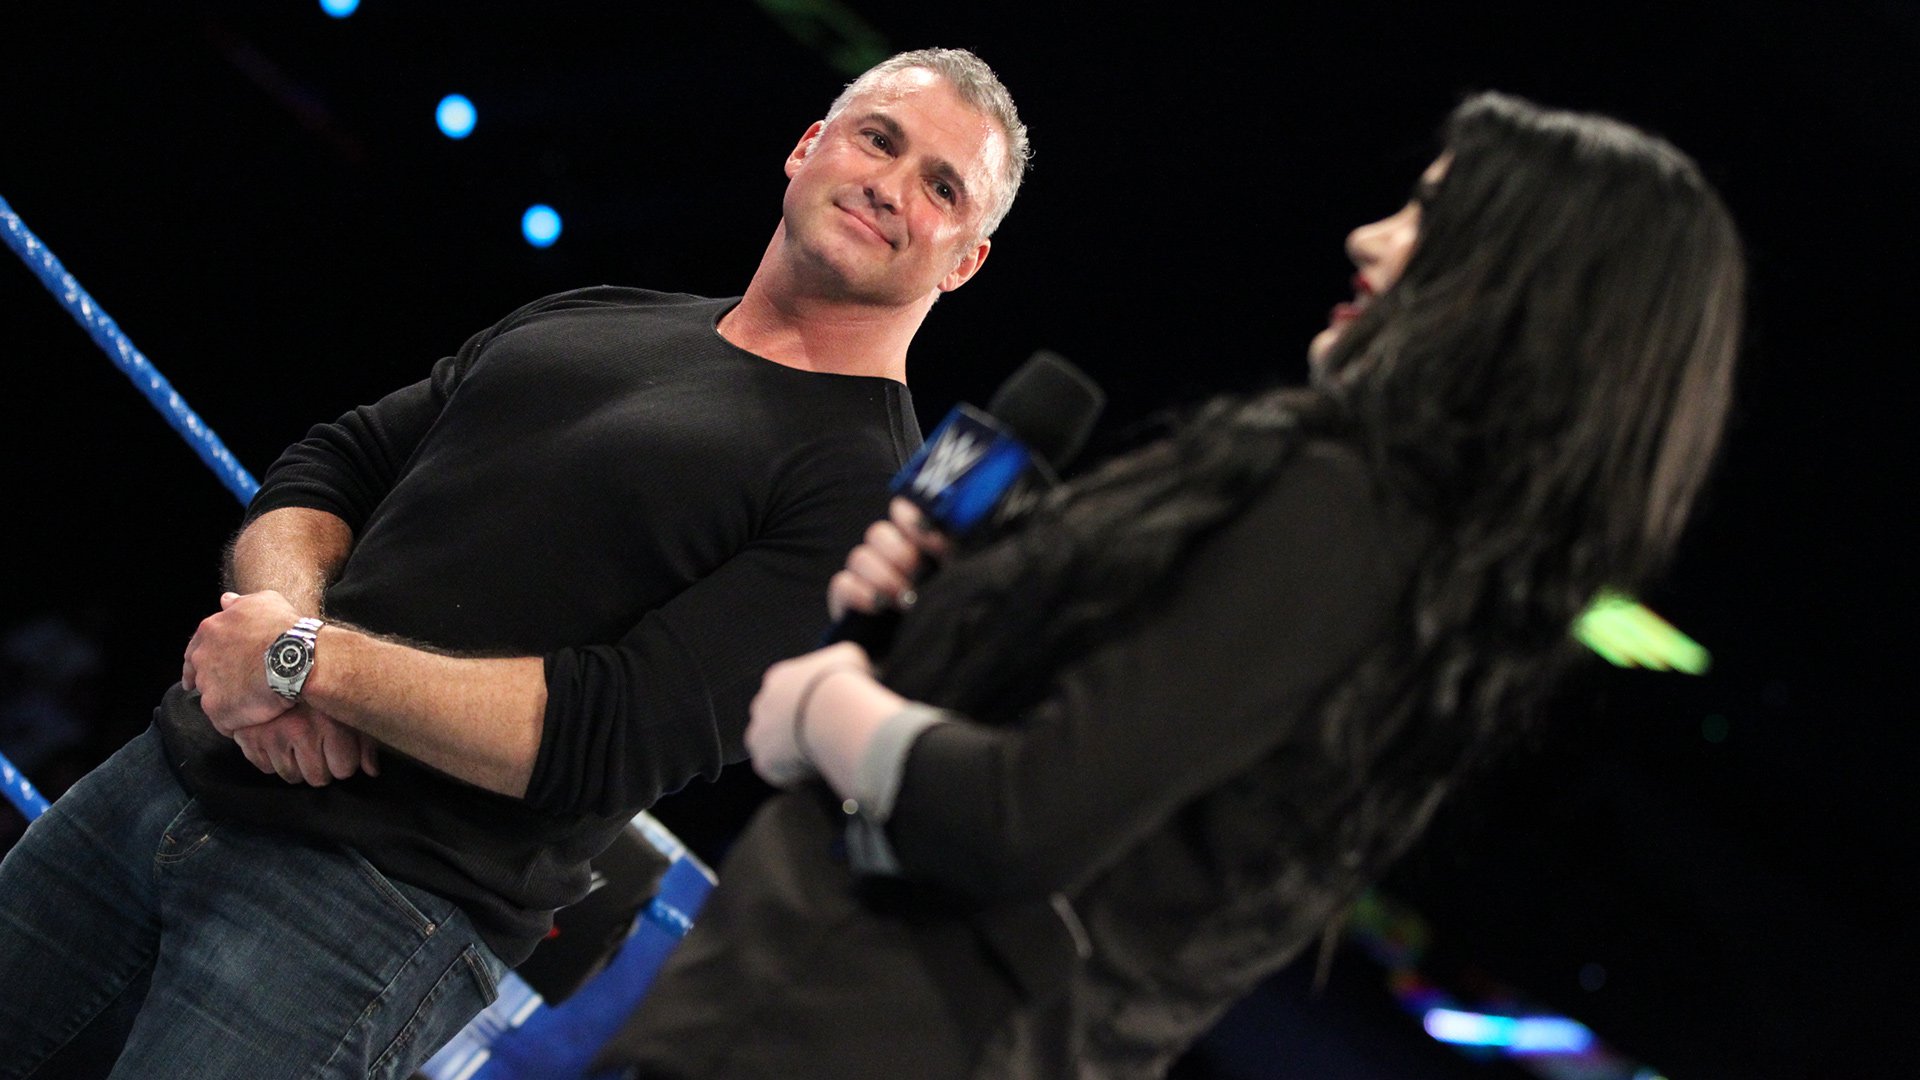 Shane McMahon announced Paige as the new General Manager of SmackDown